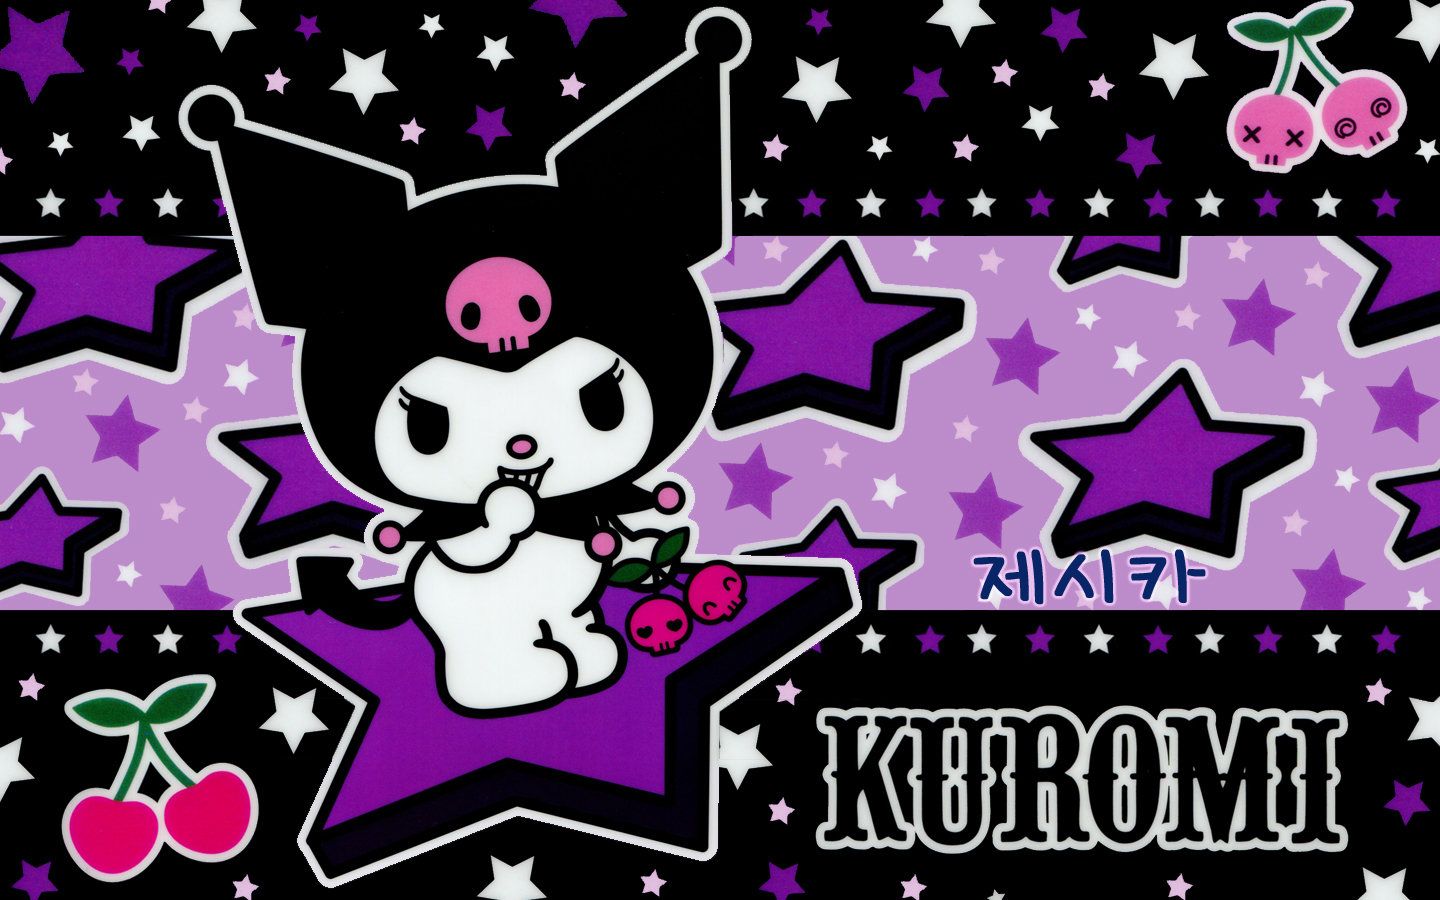 Free download Creative Commons Attribution Noncommercial No Derivative Works 30 [1440x900] for your Desktop, Mobile & Tablet. Explore Kuromi Wallpaper. Chococat Wallpaper, My Melody Wallpaper, Sanrio Desktop Wallpaper